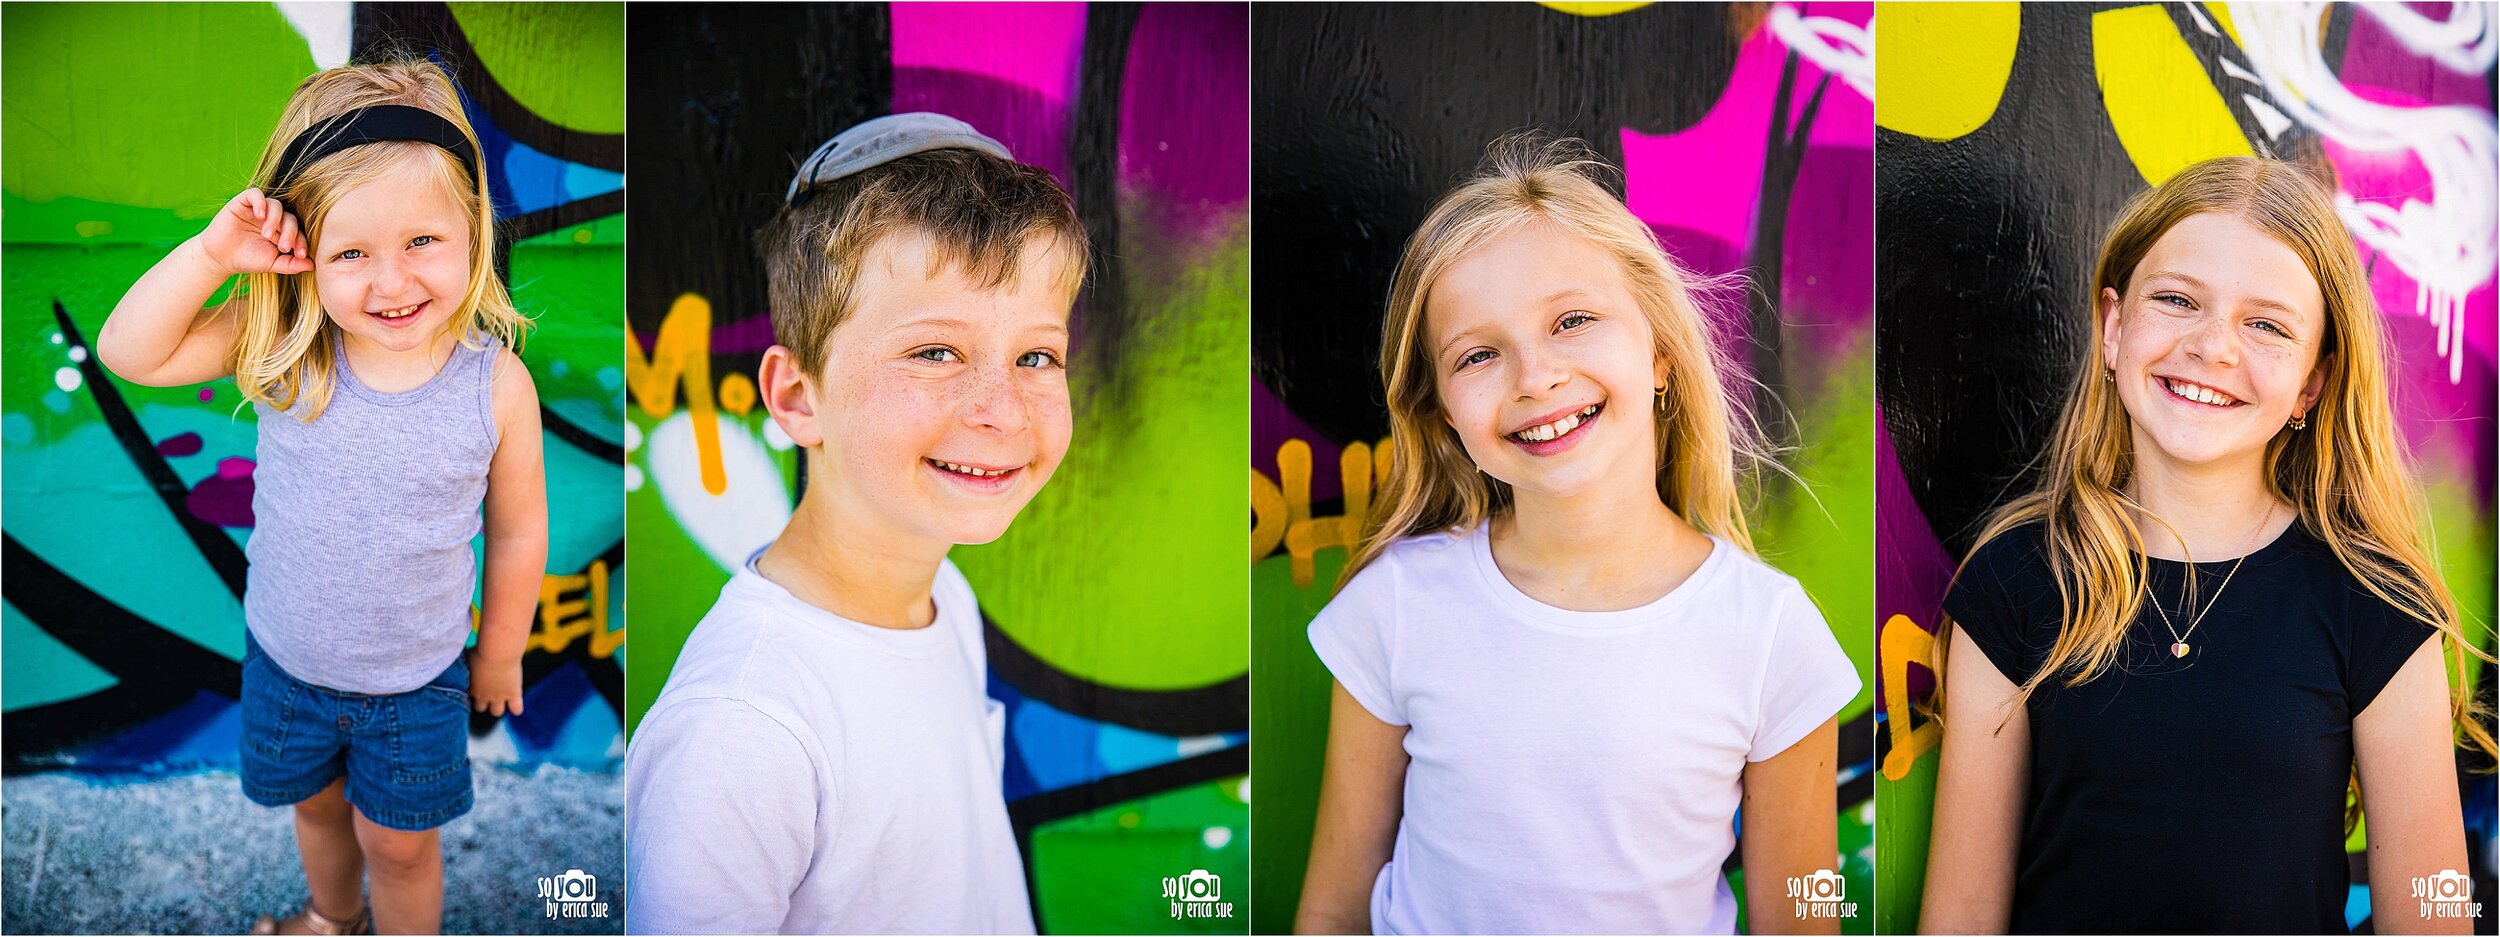 20-so-you-by-erica-sue-extended-family-session-wynwood-lifestyle-photographer-CD8A7812 (2).jpg